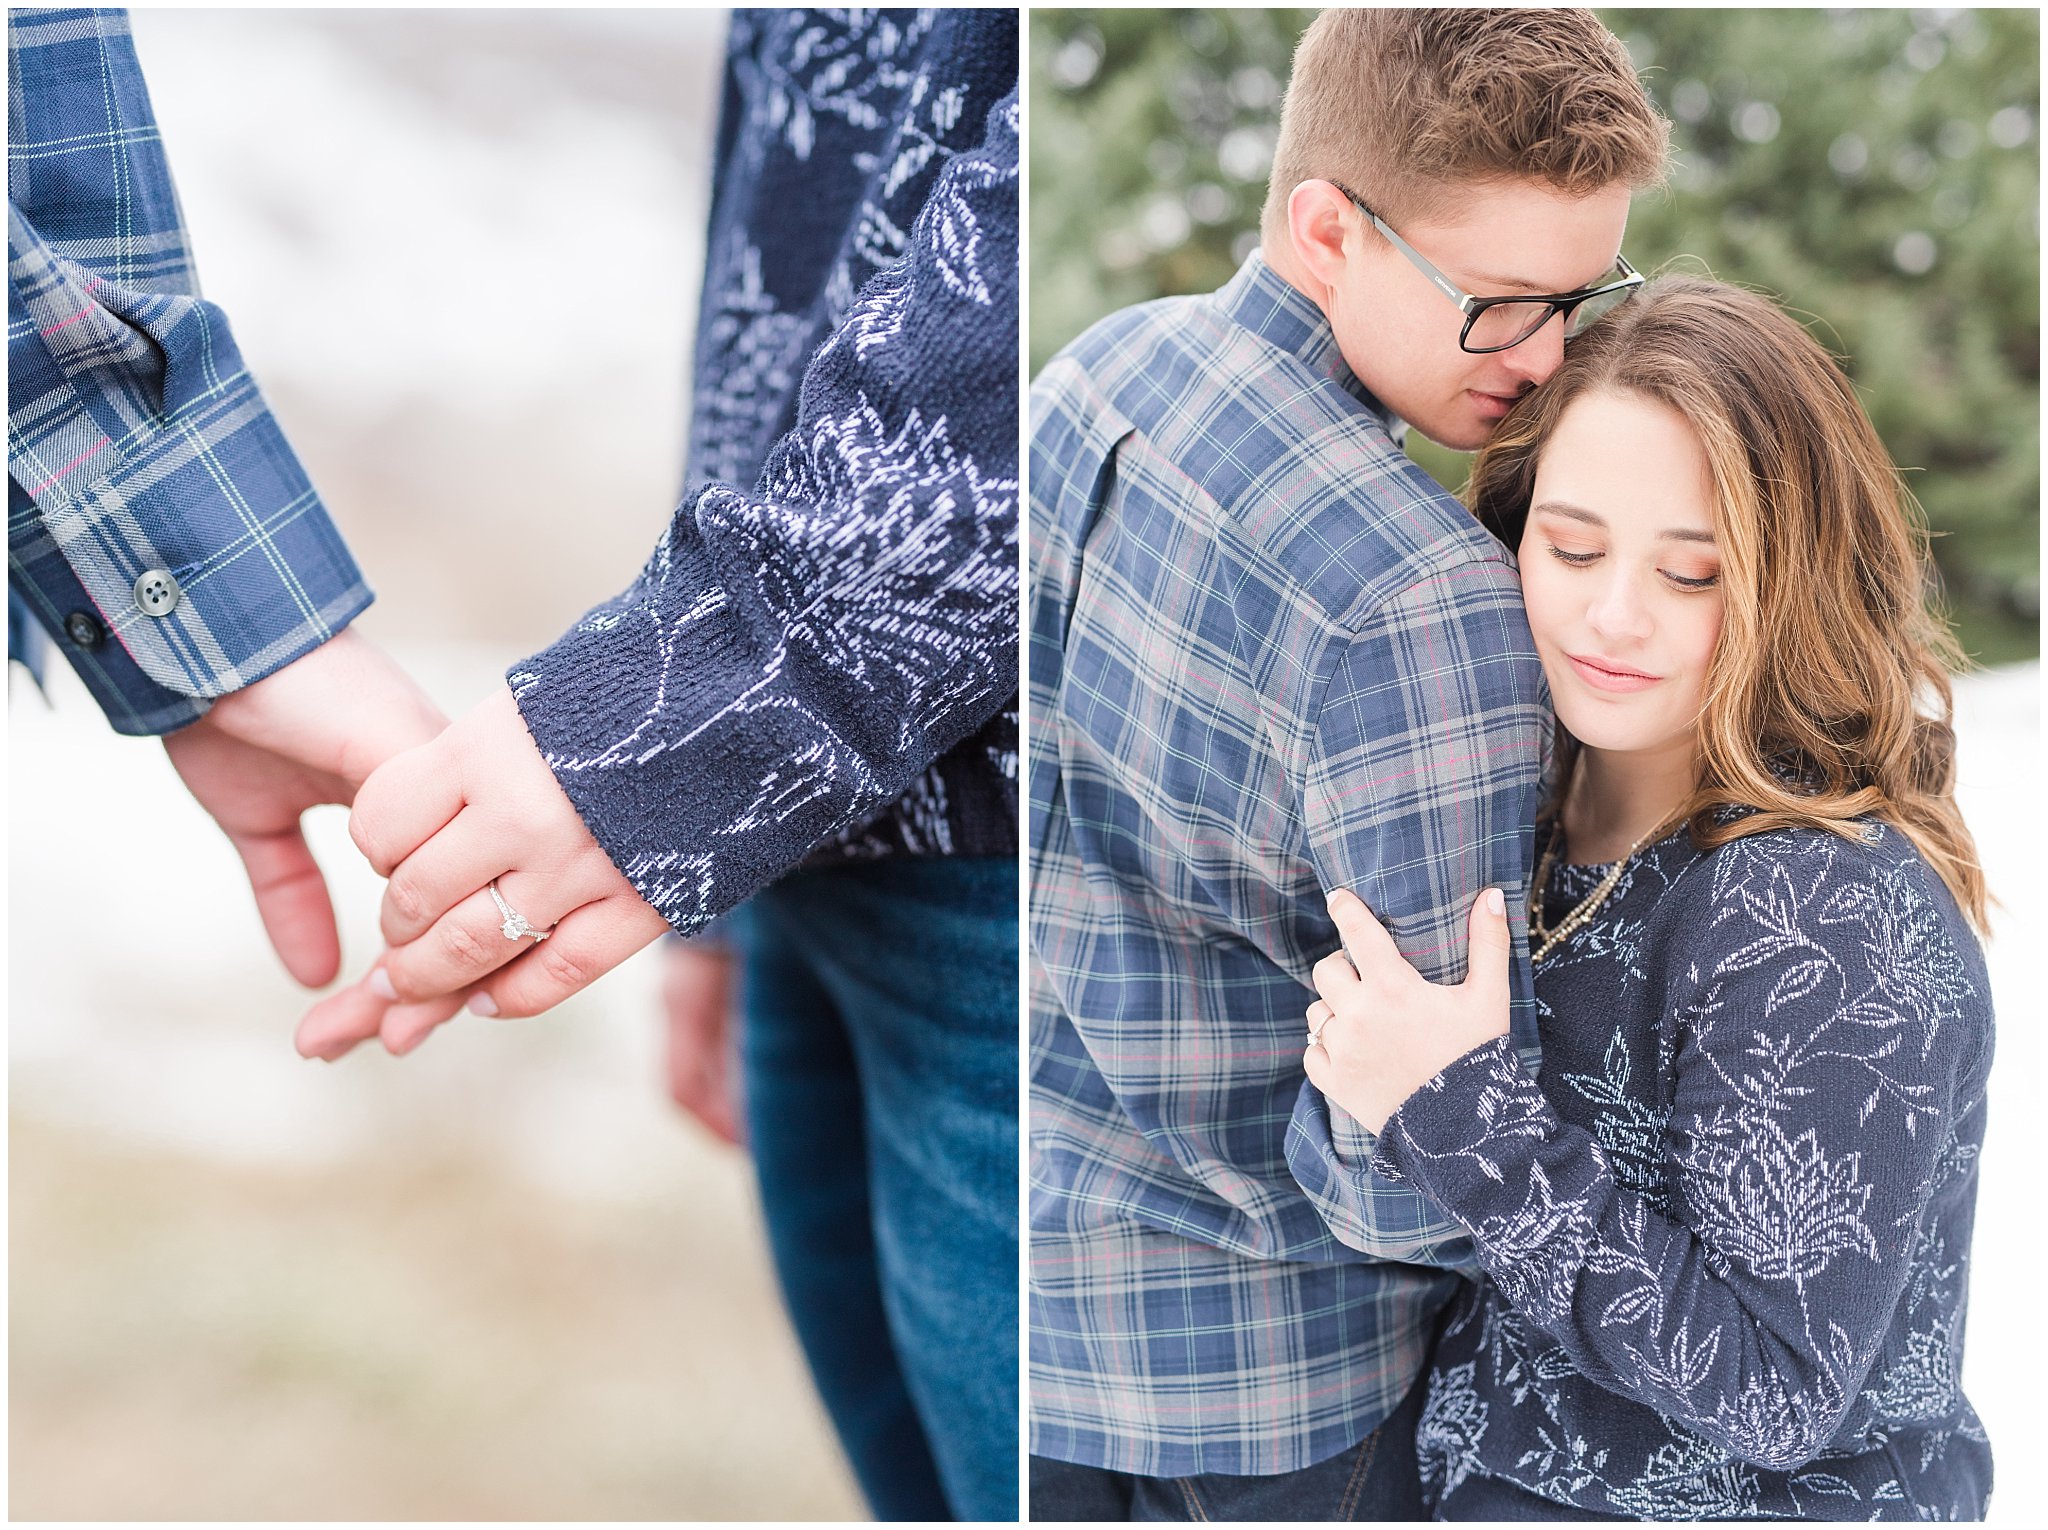 Couple in navy and grey casual outfits during winter mountain engagements | Trapper's Loop Winter Engagement | Jessie and Dallin Photography